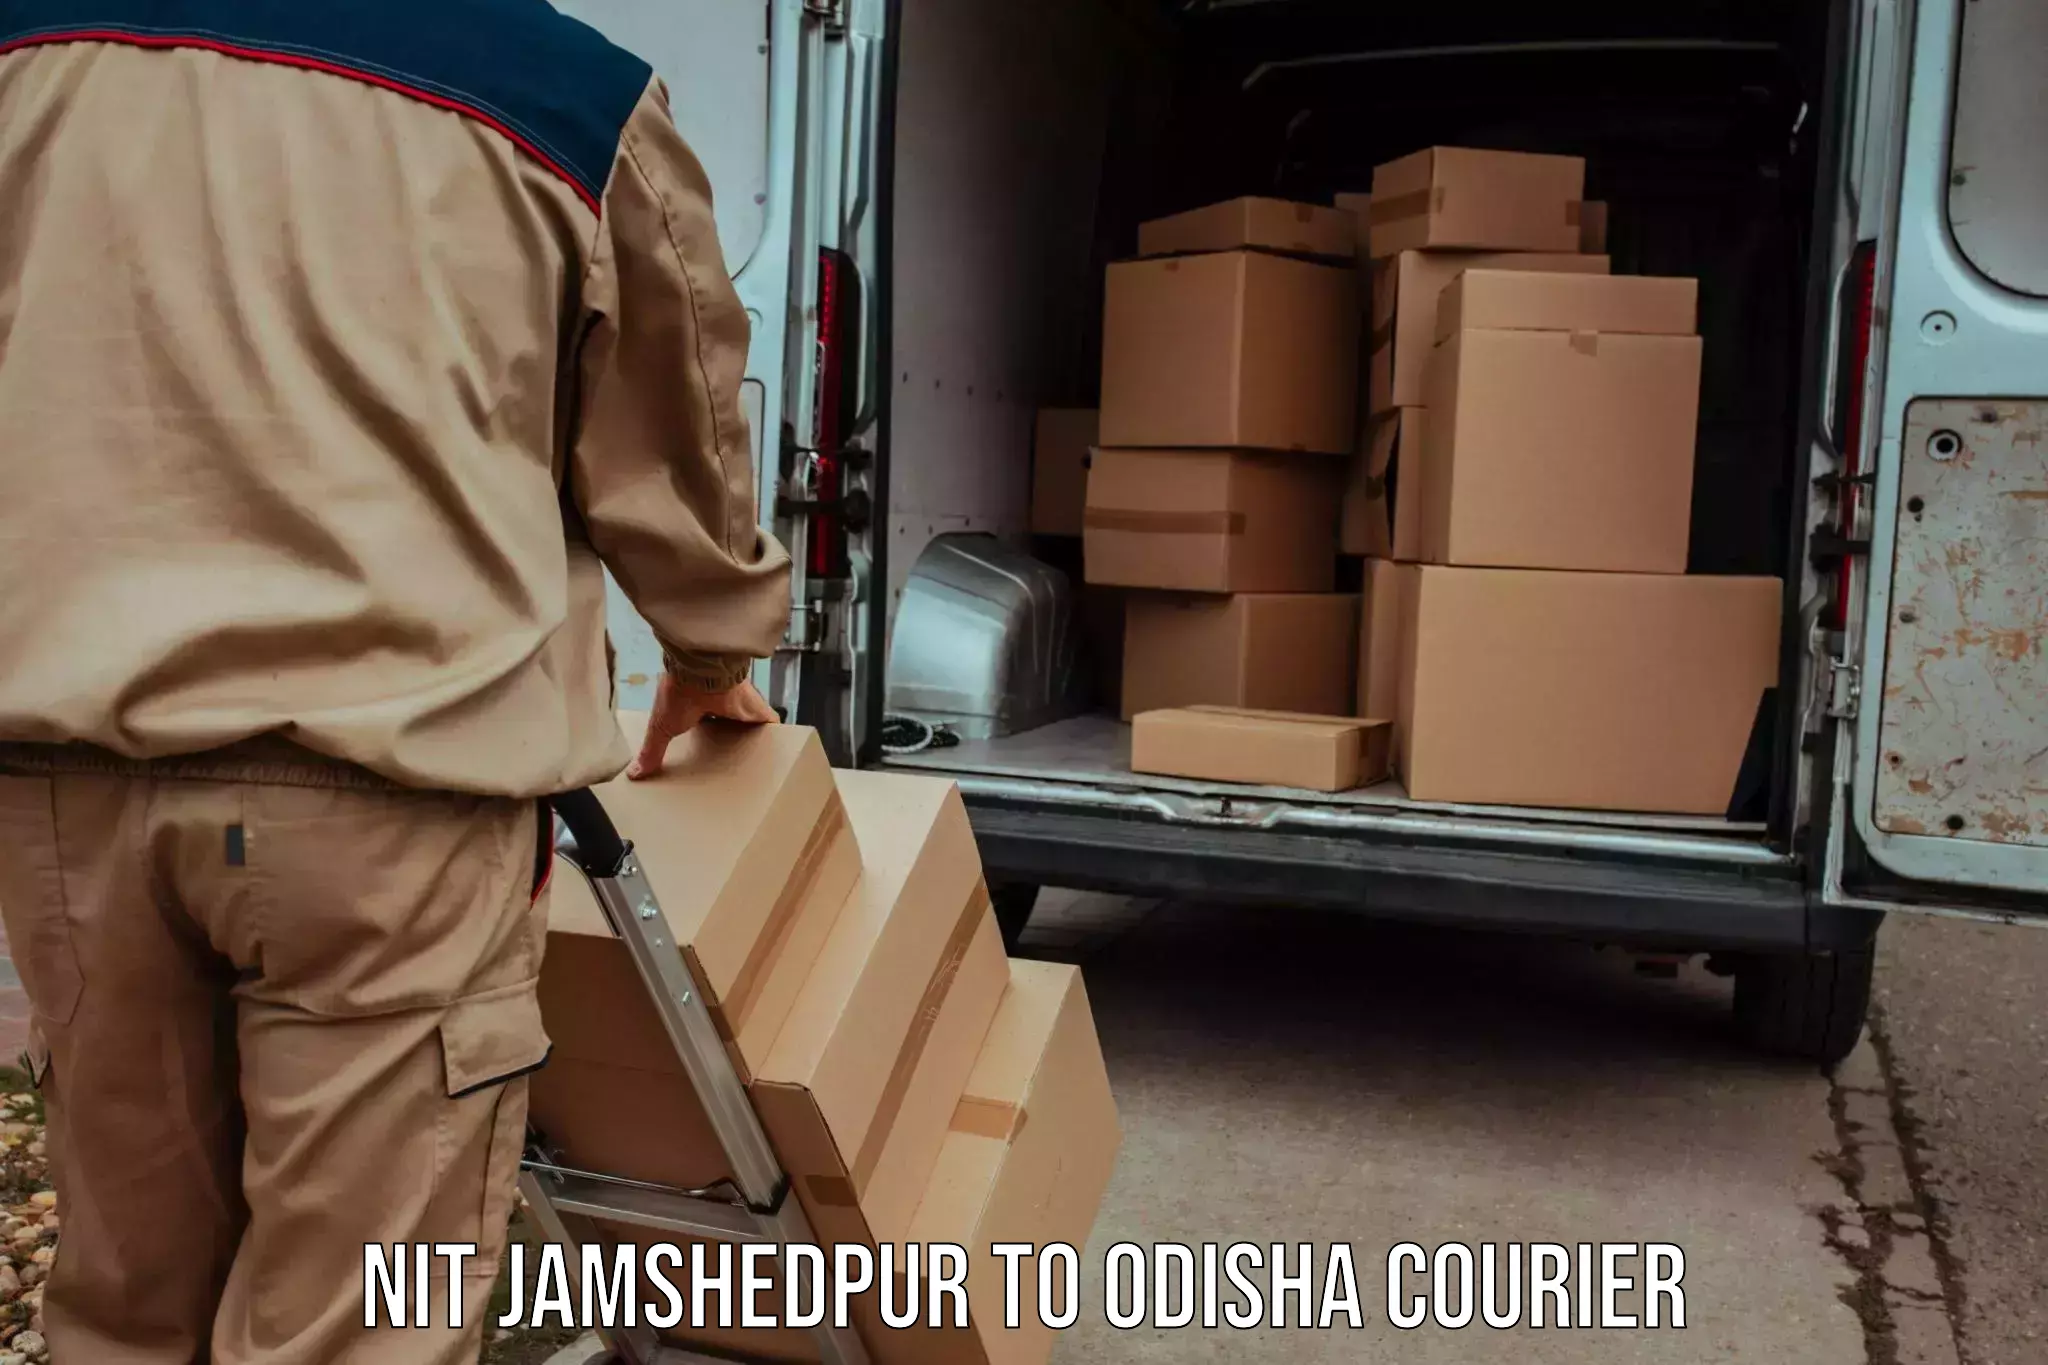 Enhanced tracking features NIT Jamshedpur to Barbil